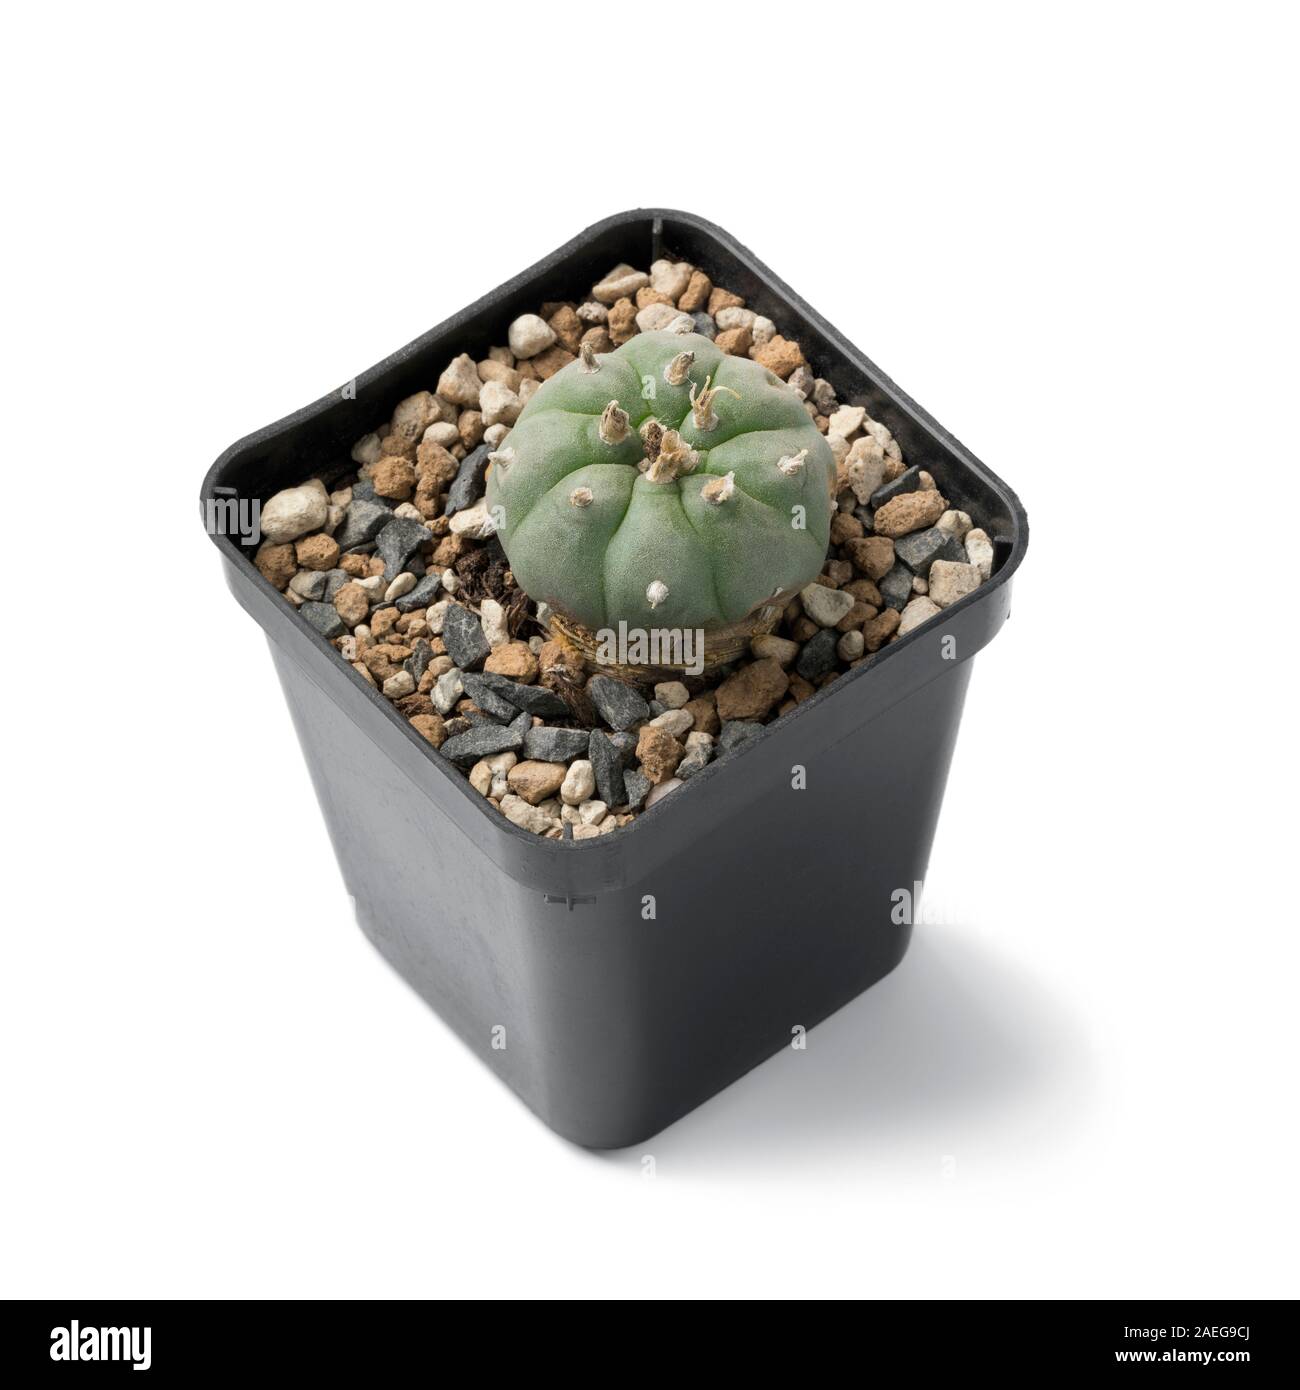 Peyote cactus Lophophora williamsii in a pot used as a hallucinogen by the Native Americans and recreational drug user isolated on white background Stock Photo